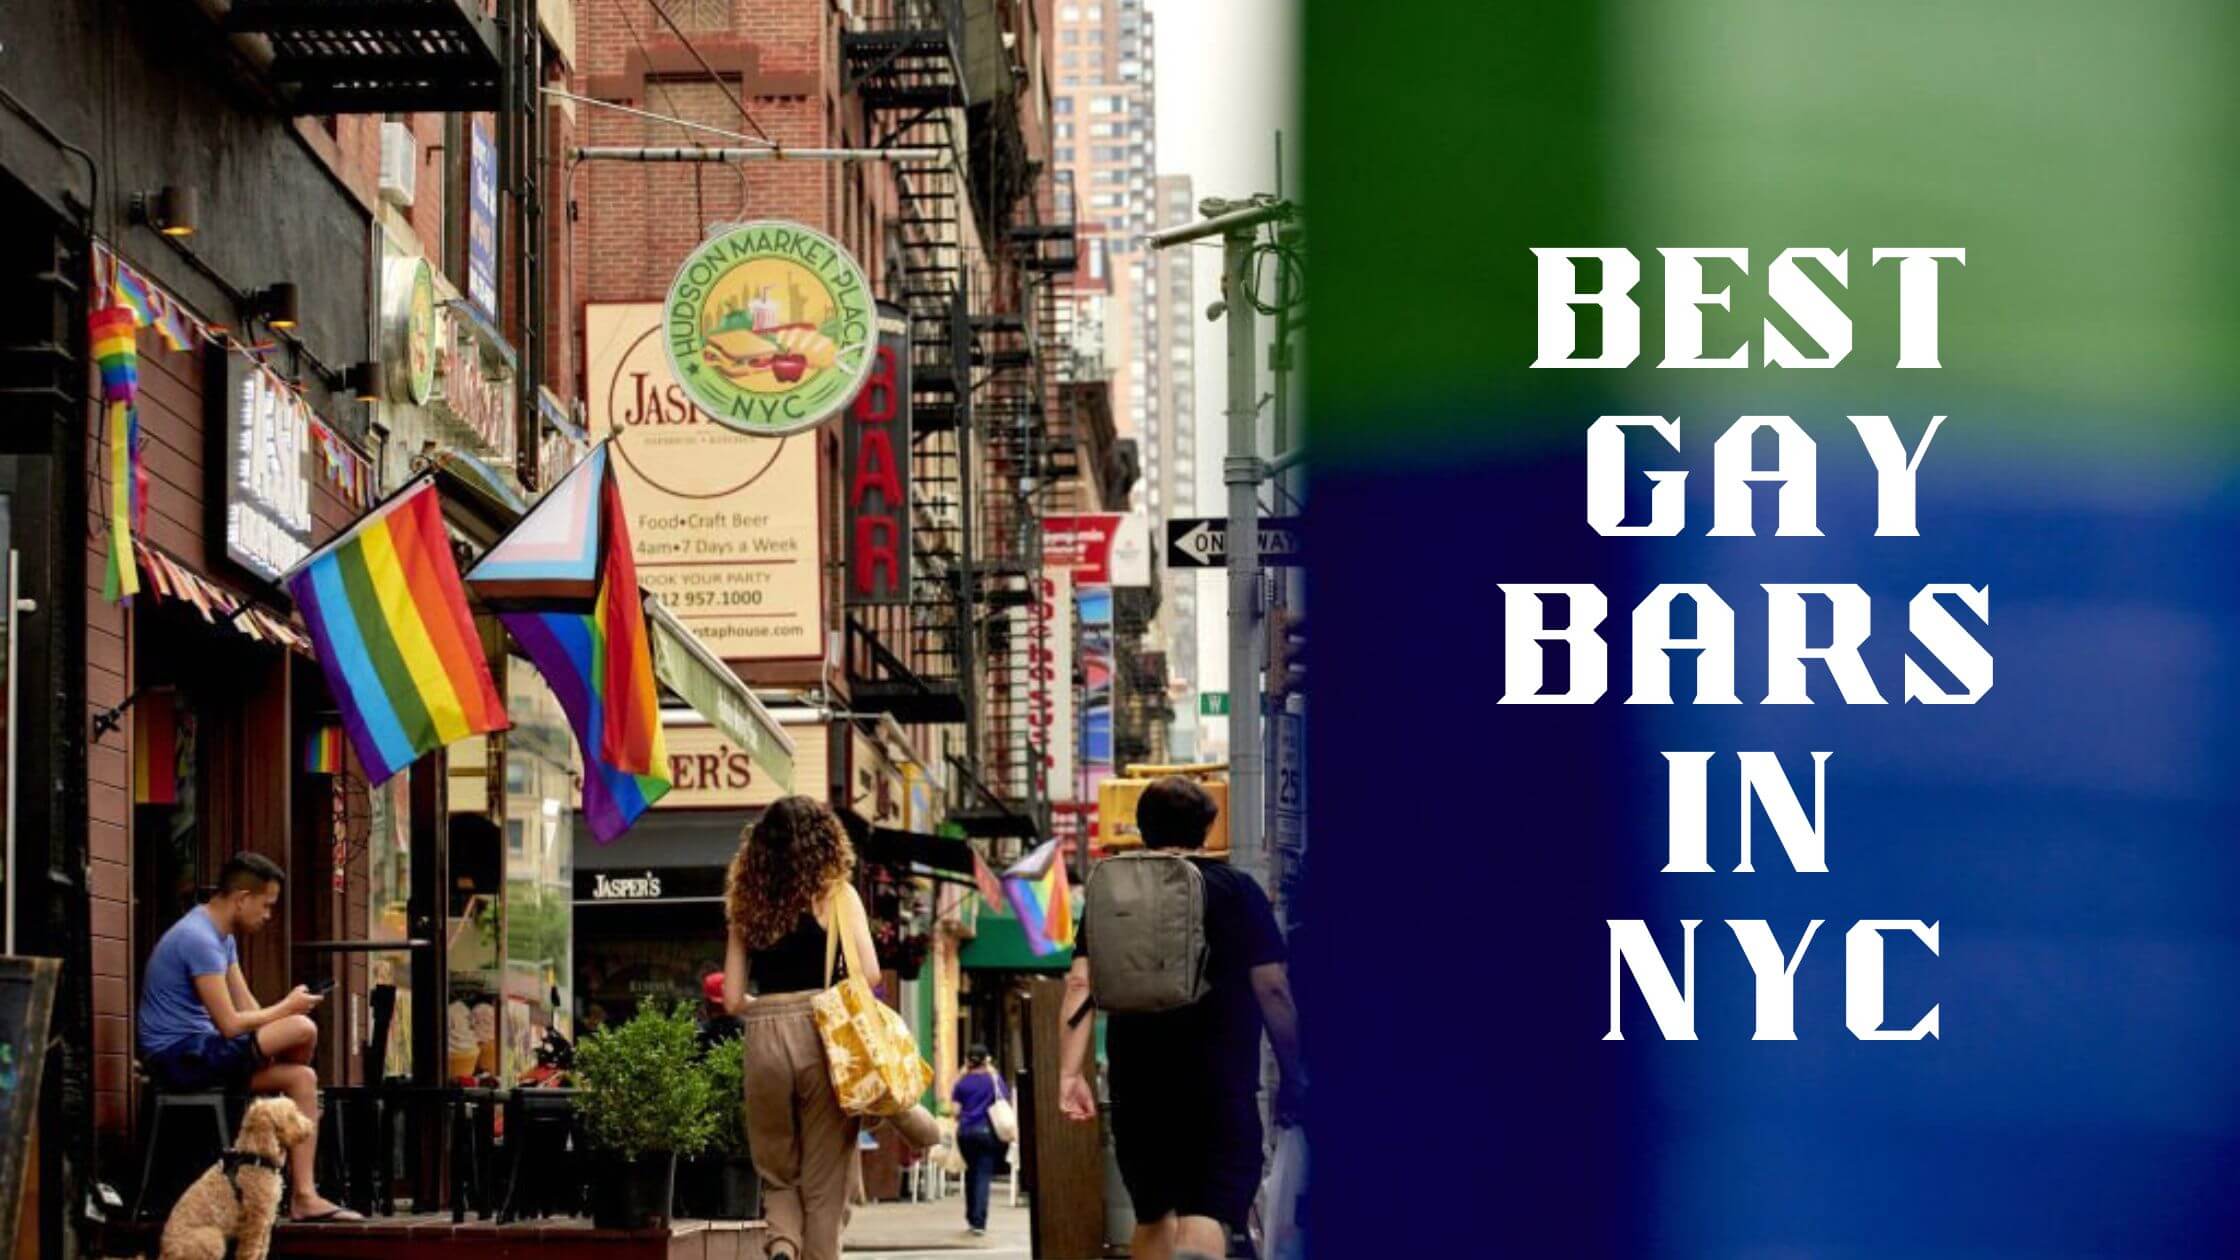 Best Gay Bars In NYC